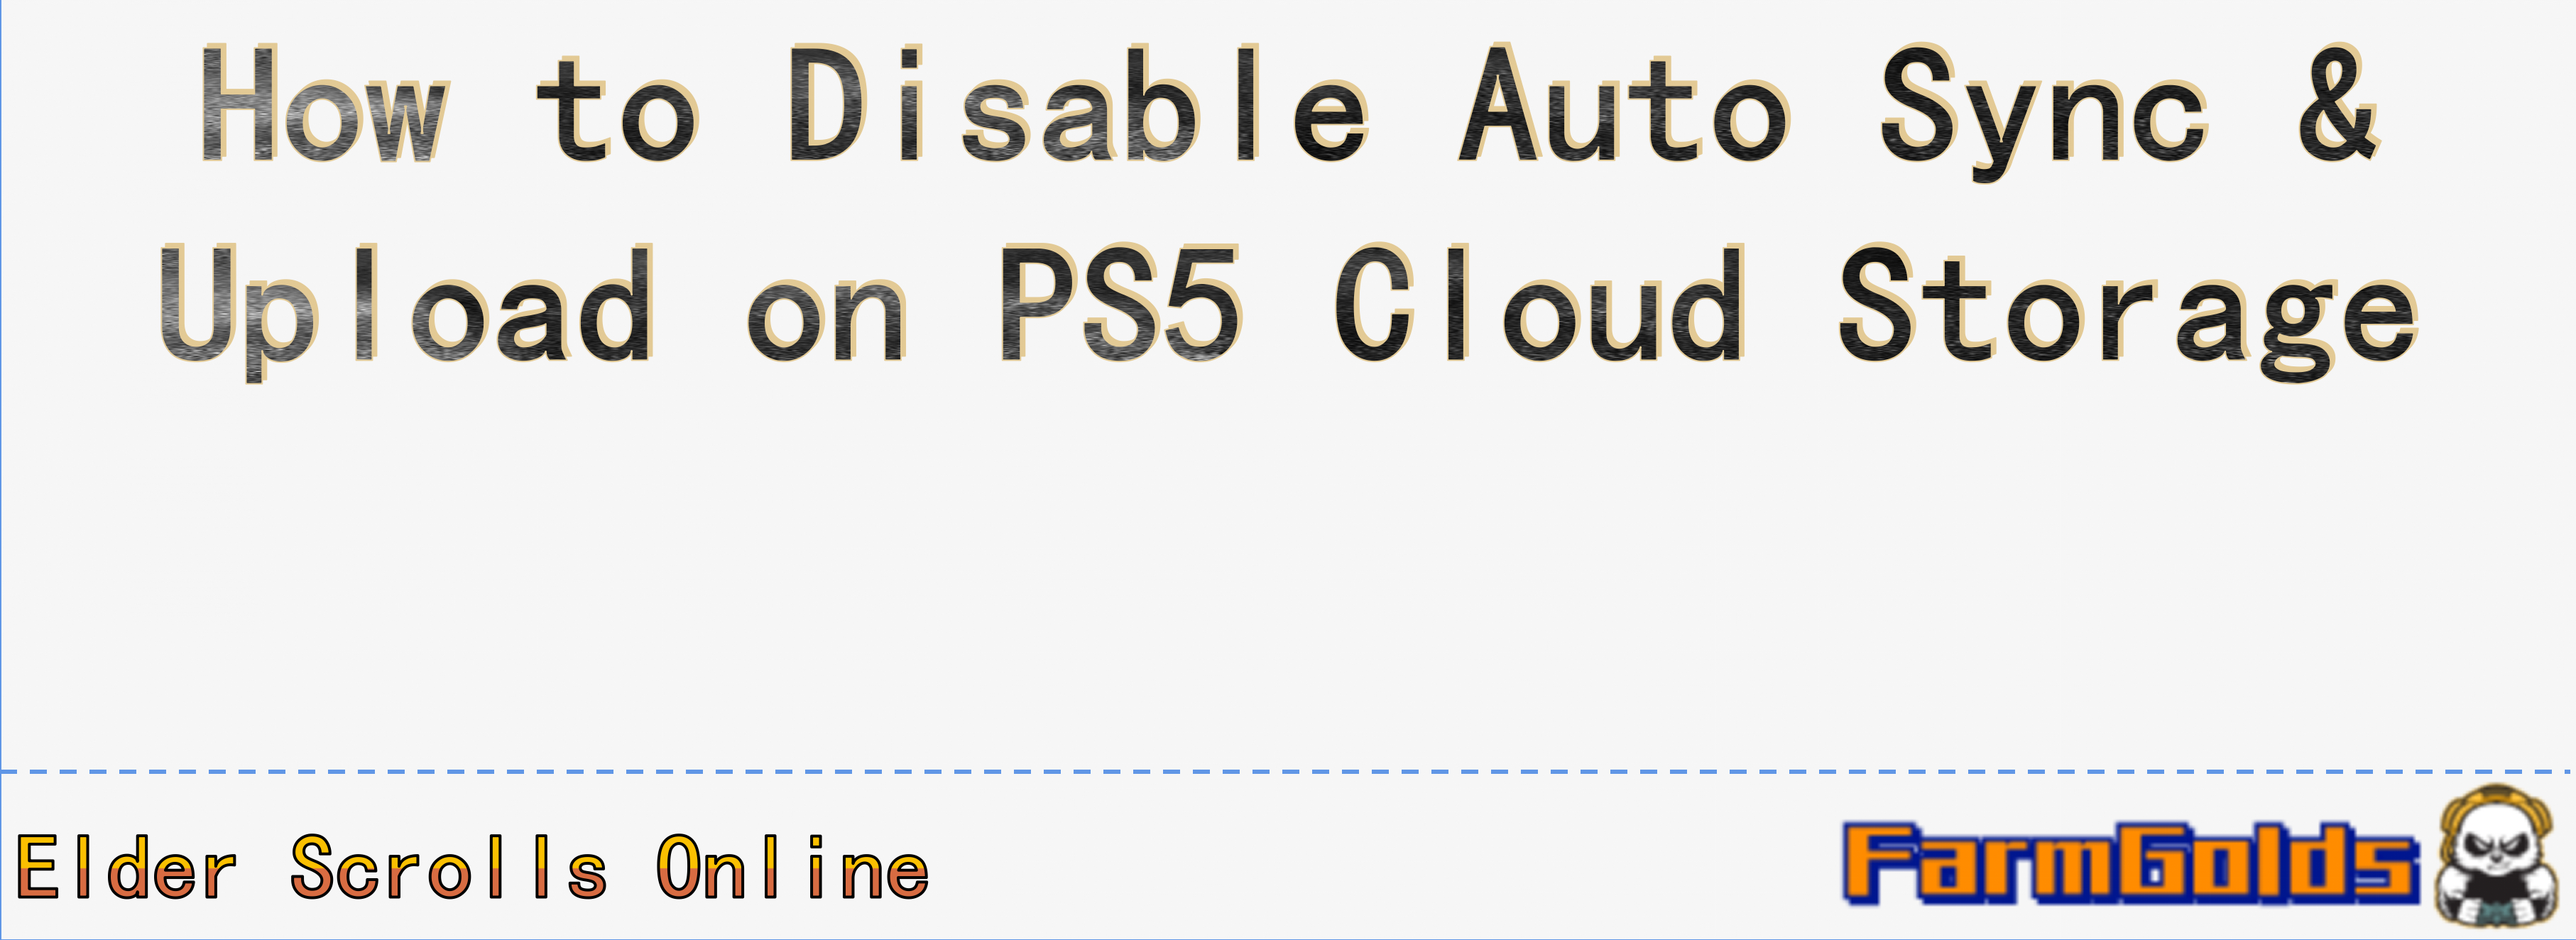 How to Disable Auto Sync & Upload on PS5 Cloud Storage